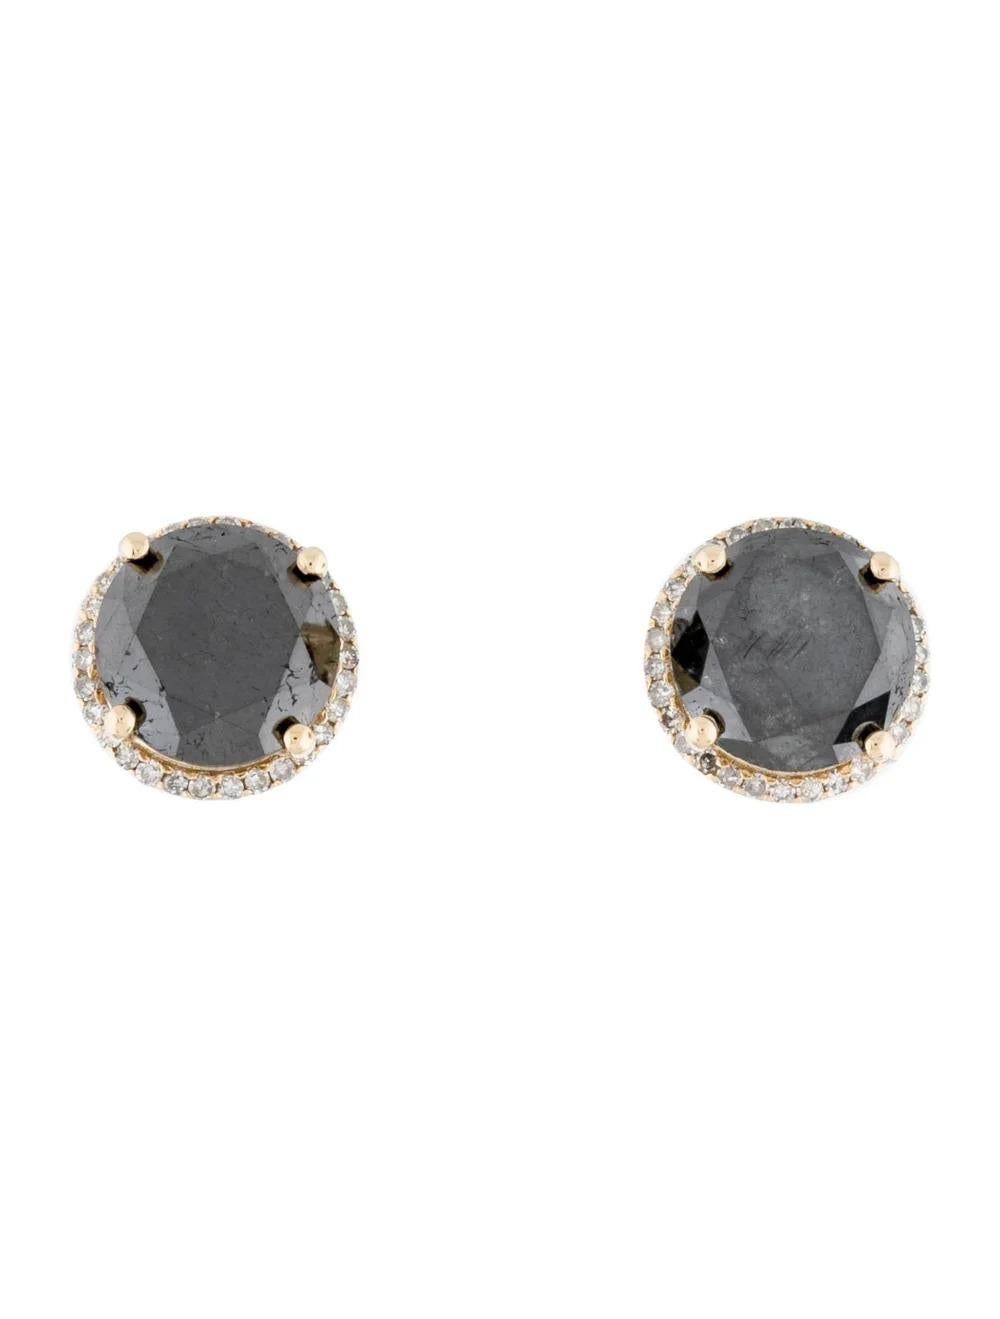 Elevate your elegance with these exquisite 14K Yellow Gold Diamond Stud Earrings. Crafted to perfection, these earrings boast remarkable craftsmanship and stunning design elements.

Specifications:

* Metal Type: 14K Yellow Gold
* Estimated item